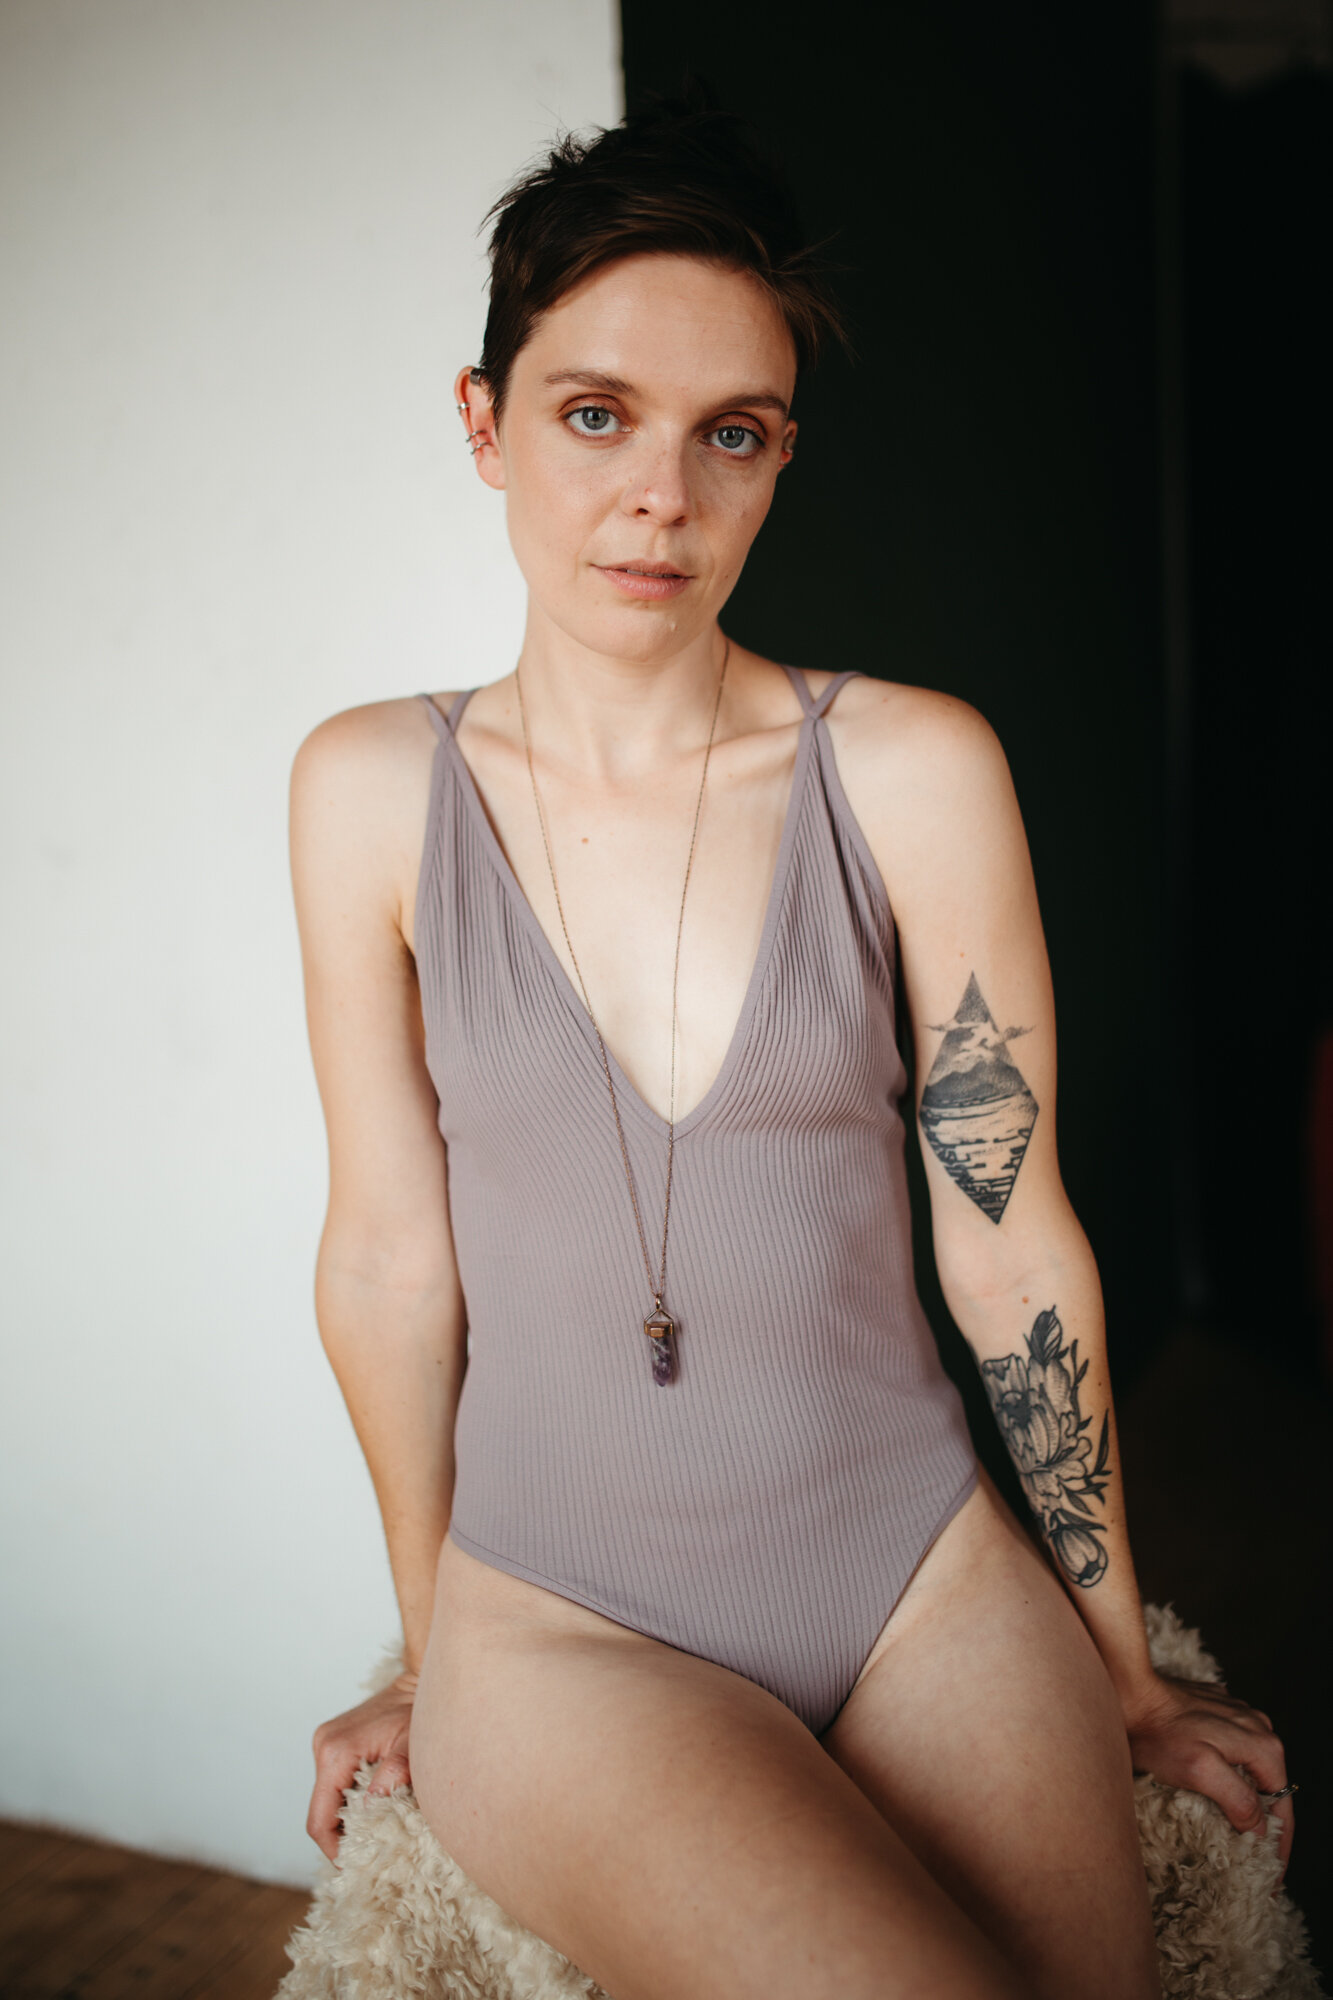 Queer boudoir photo of a person with tattoos in gray bodysuit with short brown hair looking directly into the camera